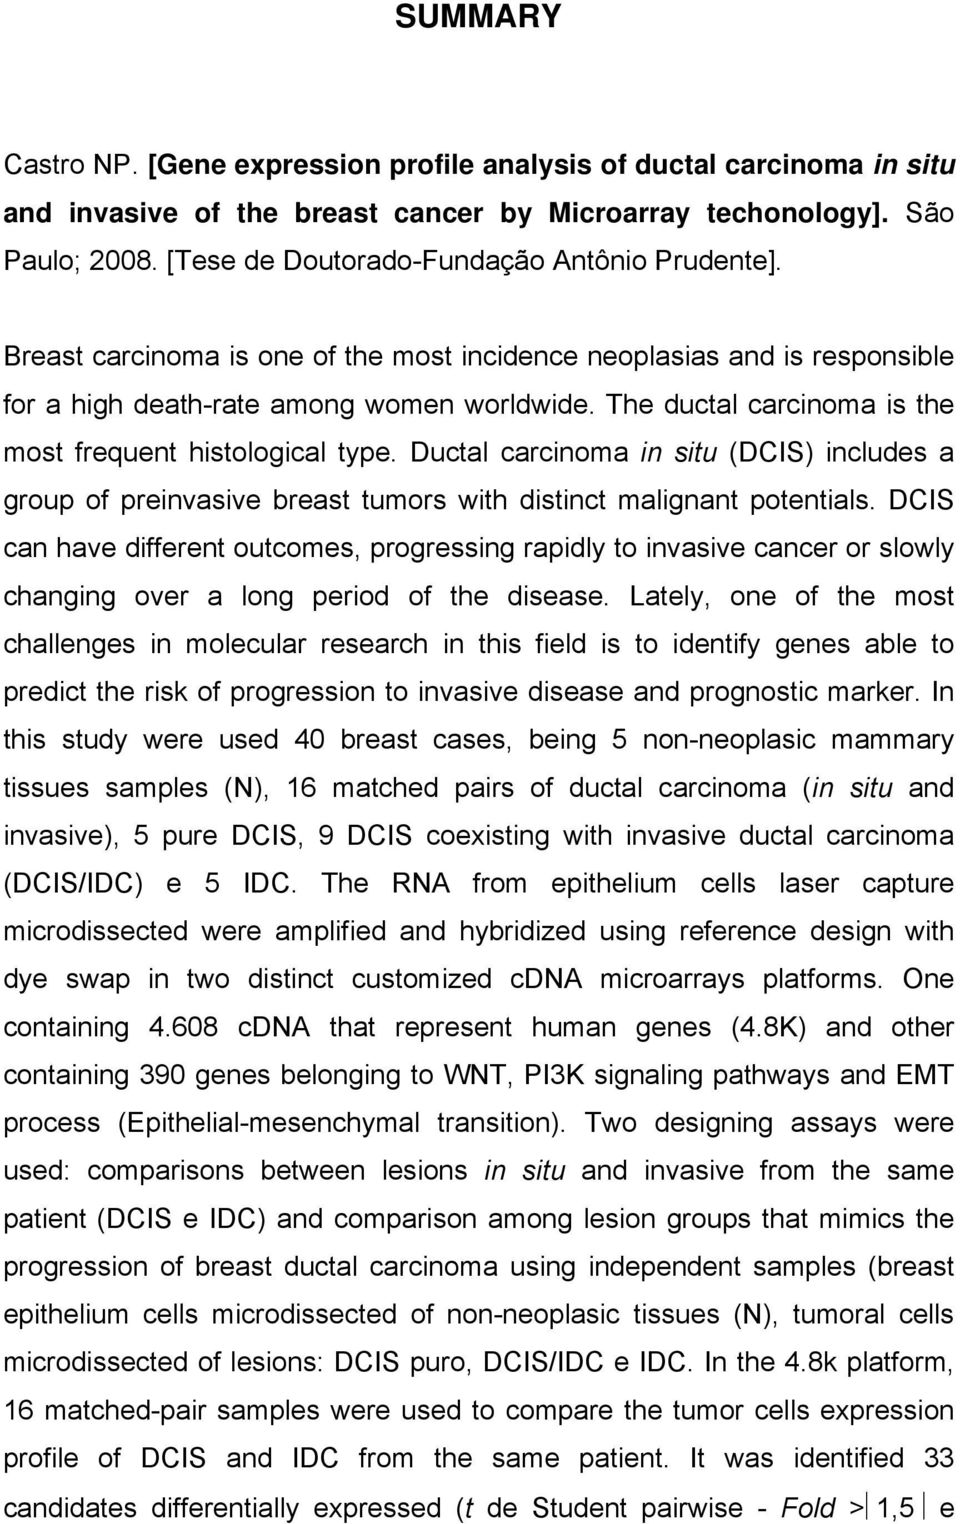 The ductal carcinoma is the most frequent histological type. Ductal carcinoma in situ (DCIS) includes a group of preinvasive breast tumors with distinct malignant potentials.